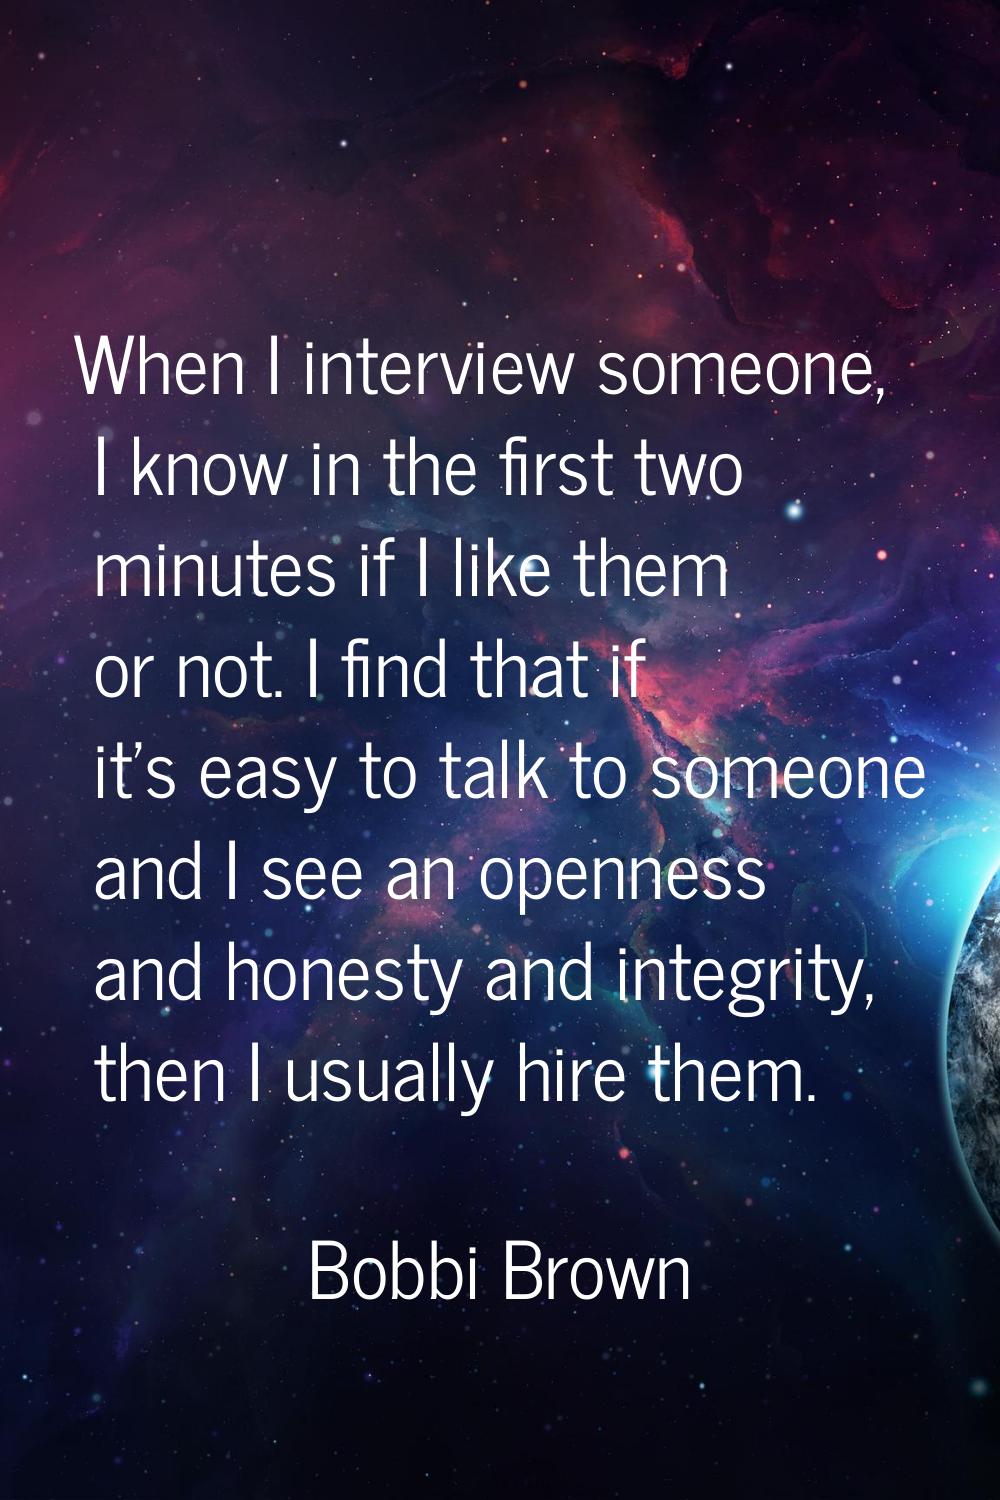 When I interview someone, I know in the first two minutes if I like them or not. I find that if it'